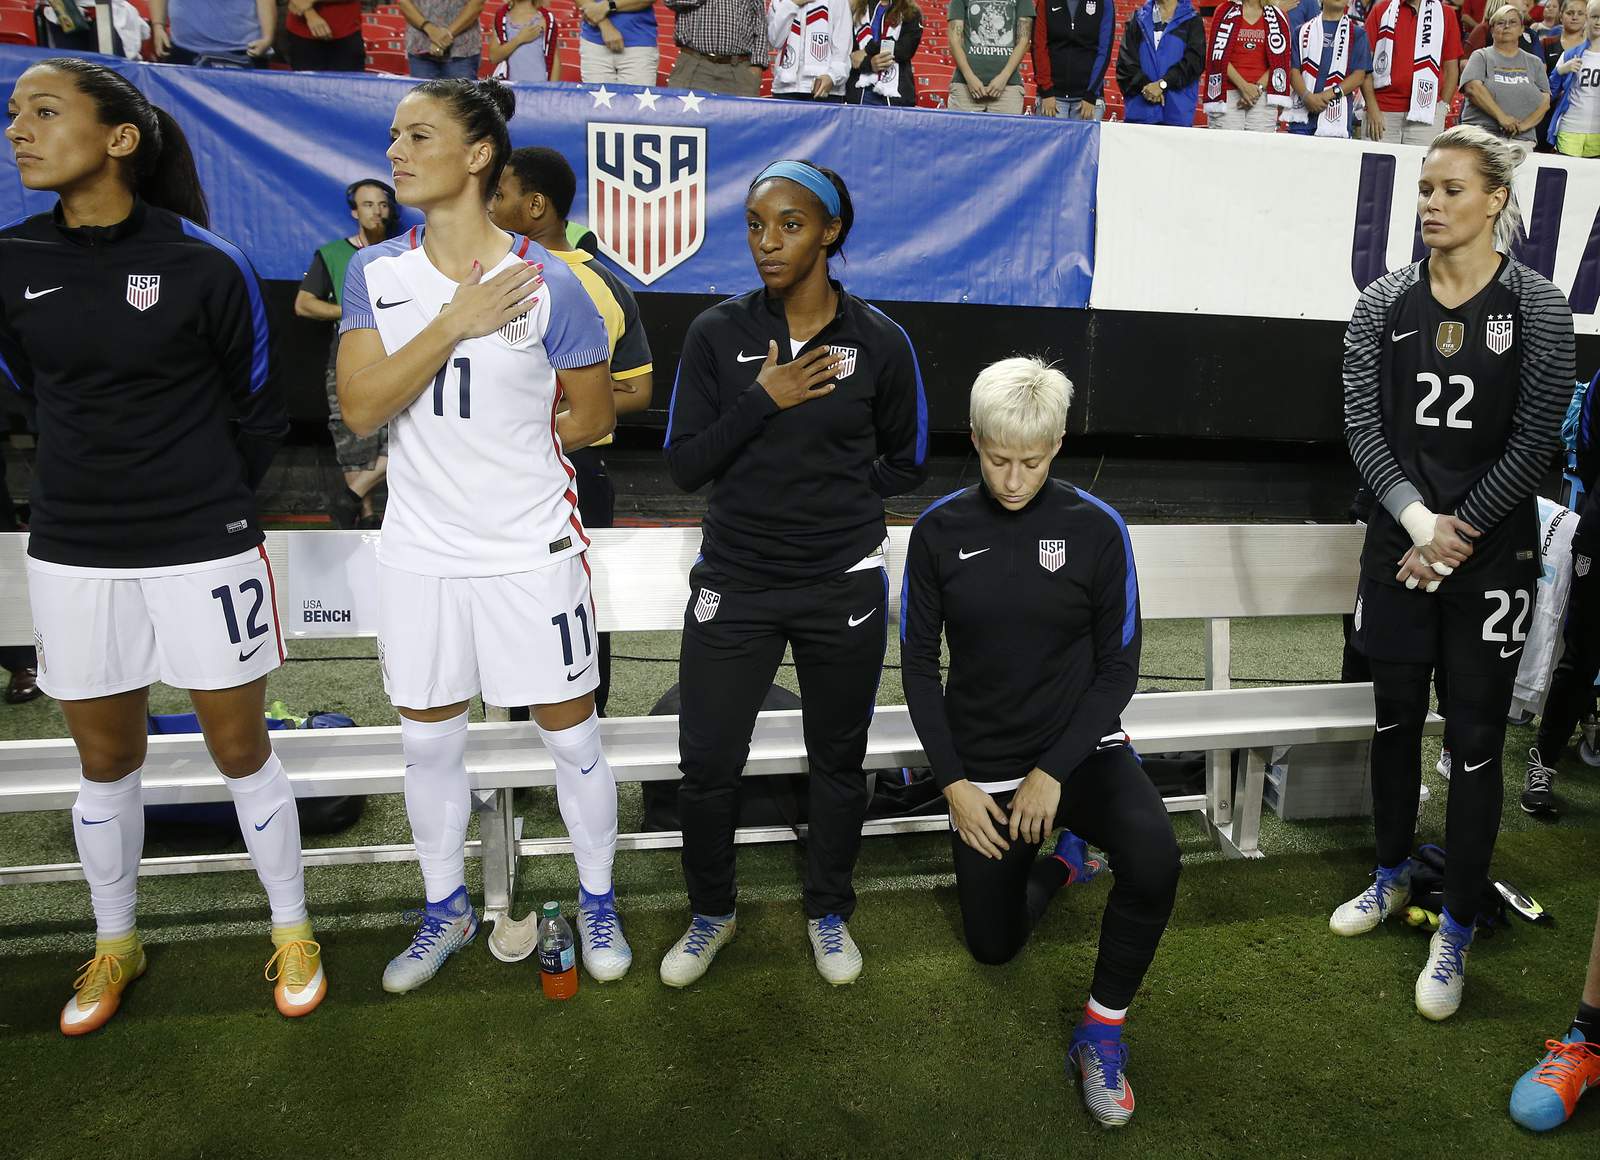 USWNT wants soccer federation to repeal anthem policy